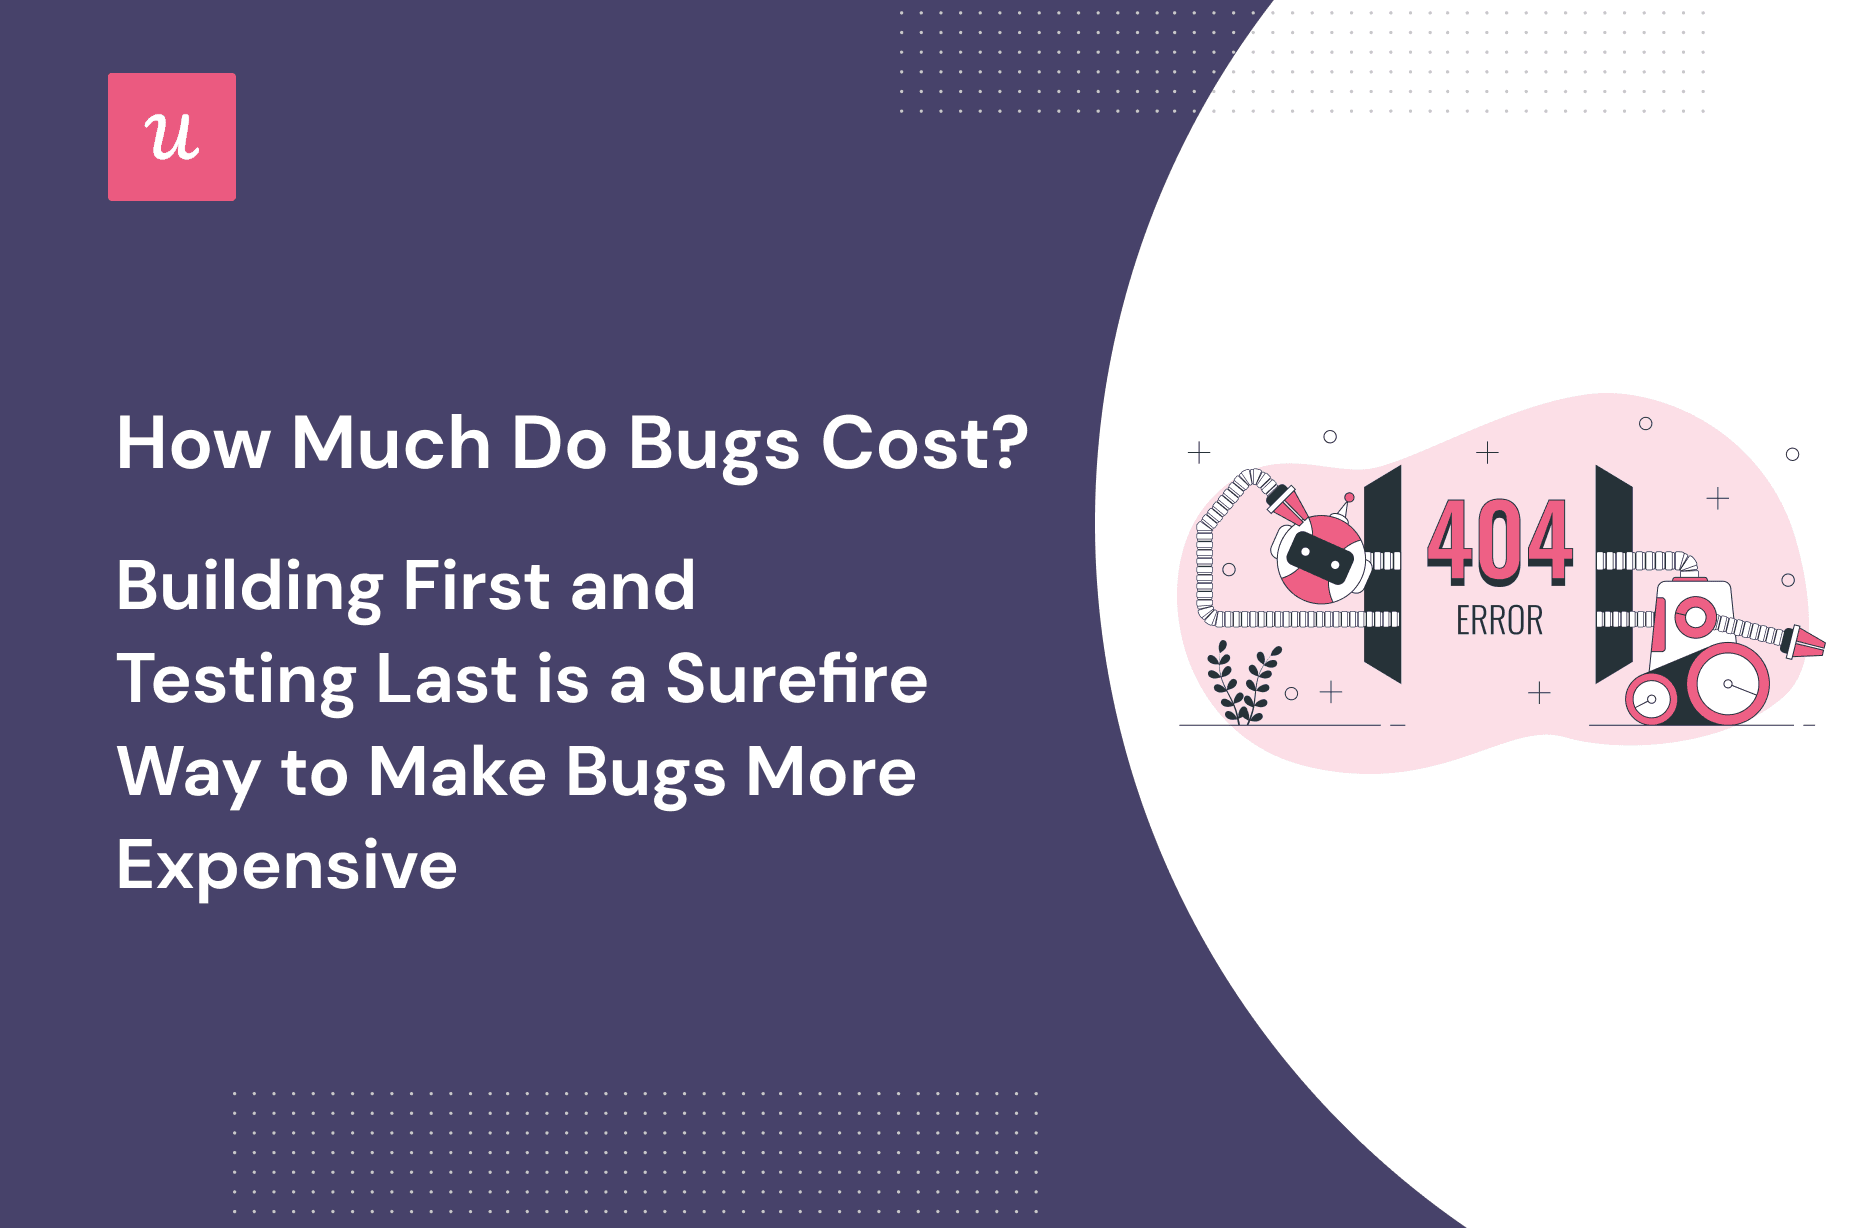 How Much Do Bugs Cost? And How Can Product Managers Optimize